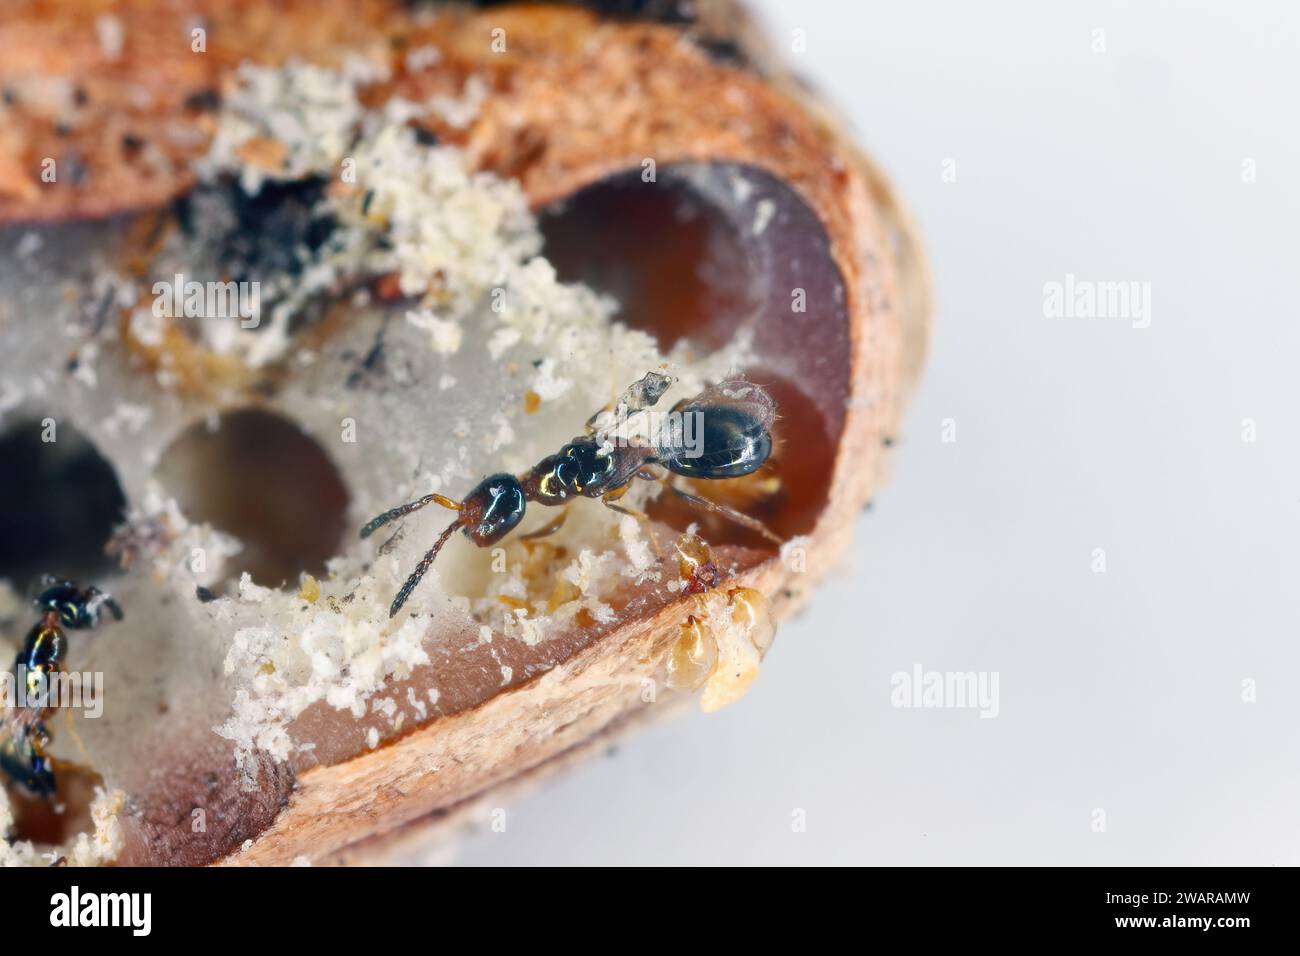 Parasitoid wasp from genus Laelius, Bethylidae family found in the seeds of a palm tree infested by the Palm seed borer (Coccotrypes dactyliperda). Stock Photo